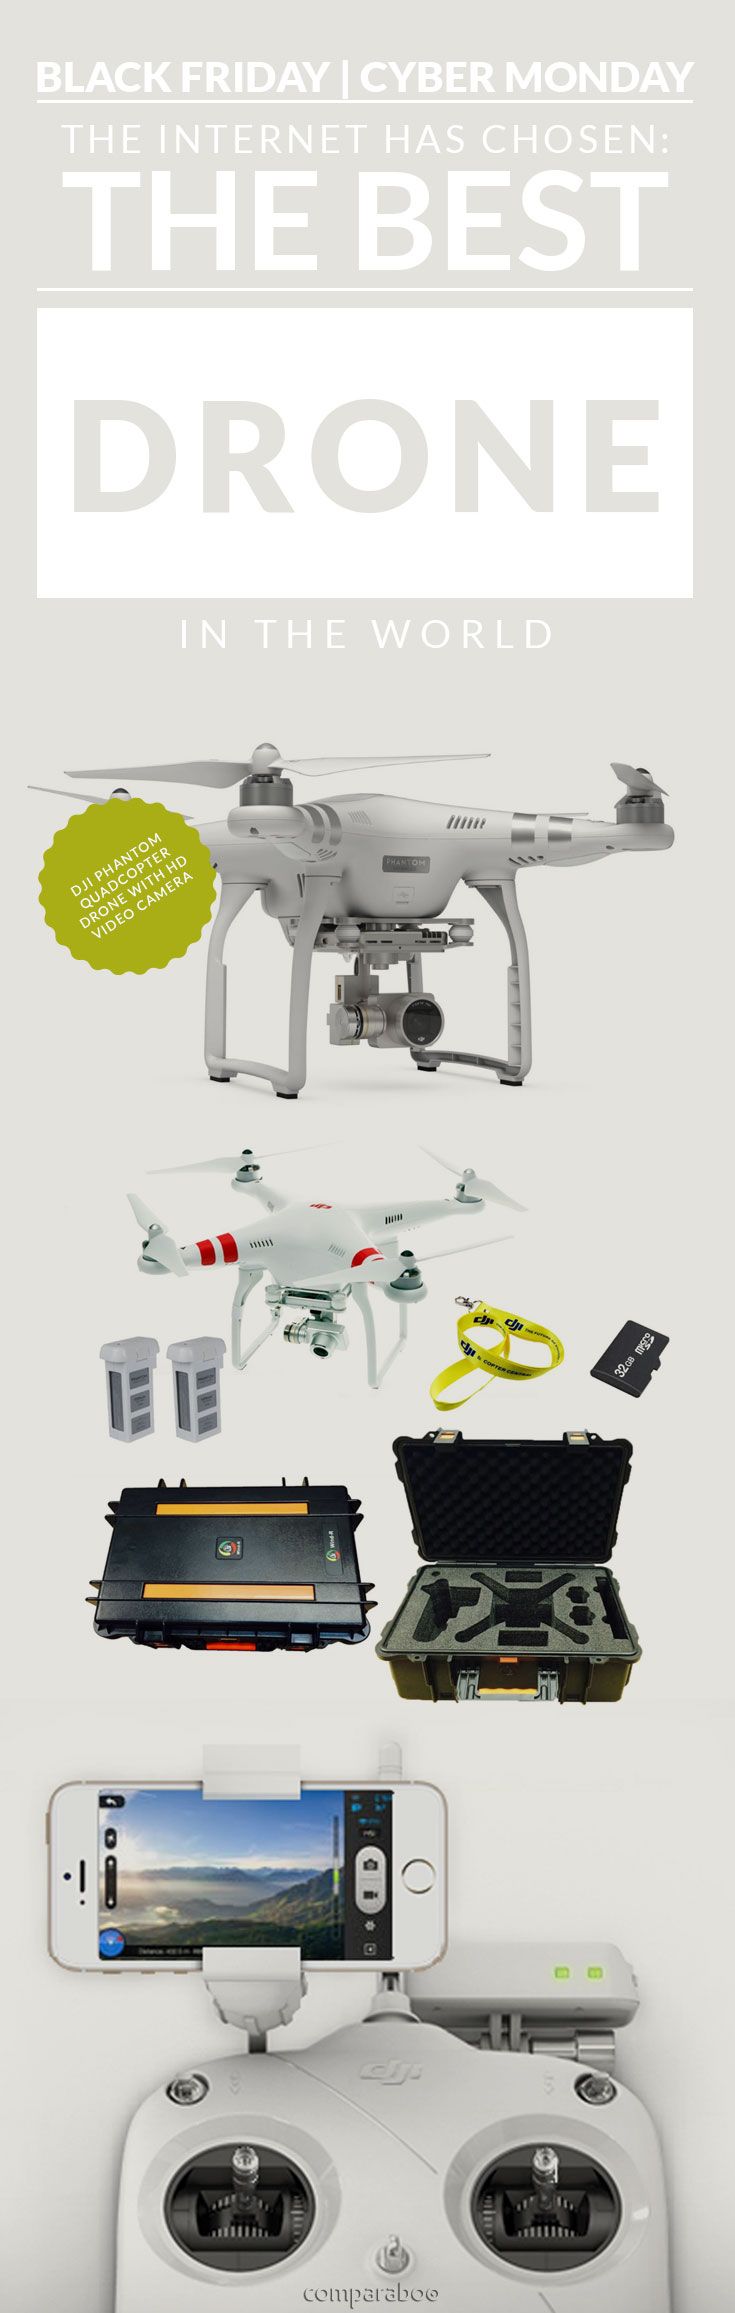 Scout the sky. Congratulations DJI on the most advanced and highly rated #drone ...